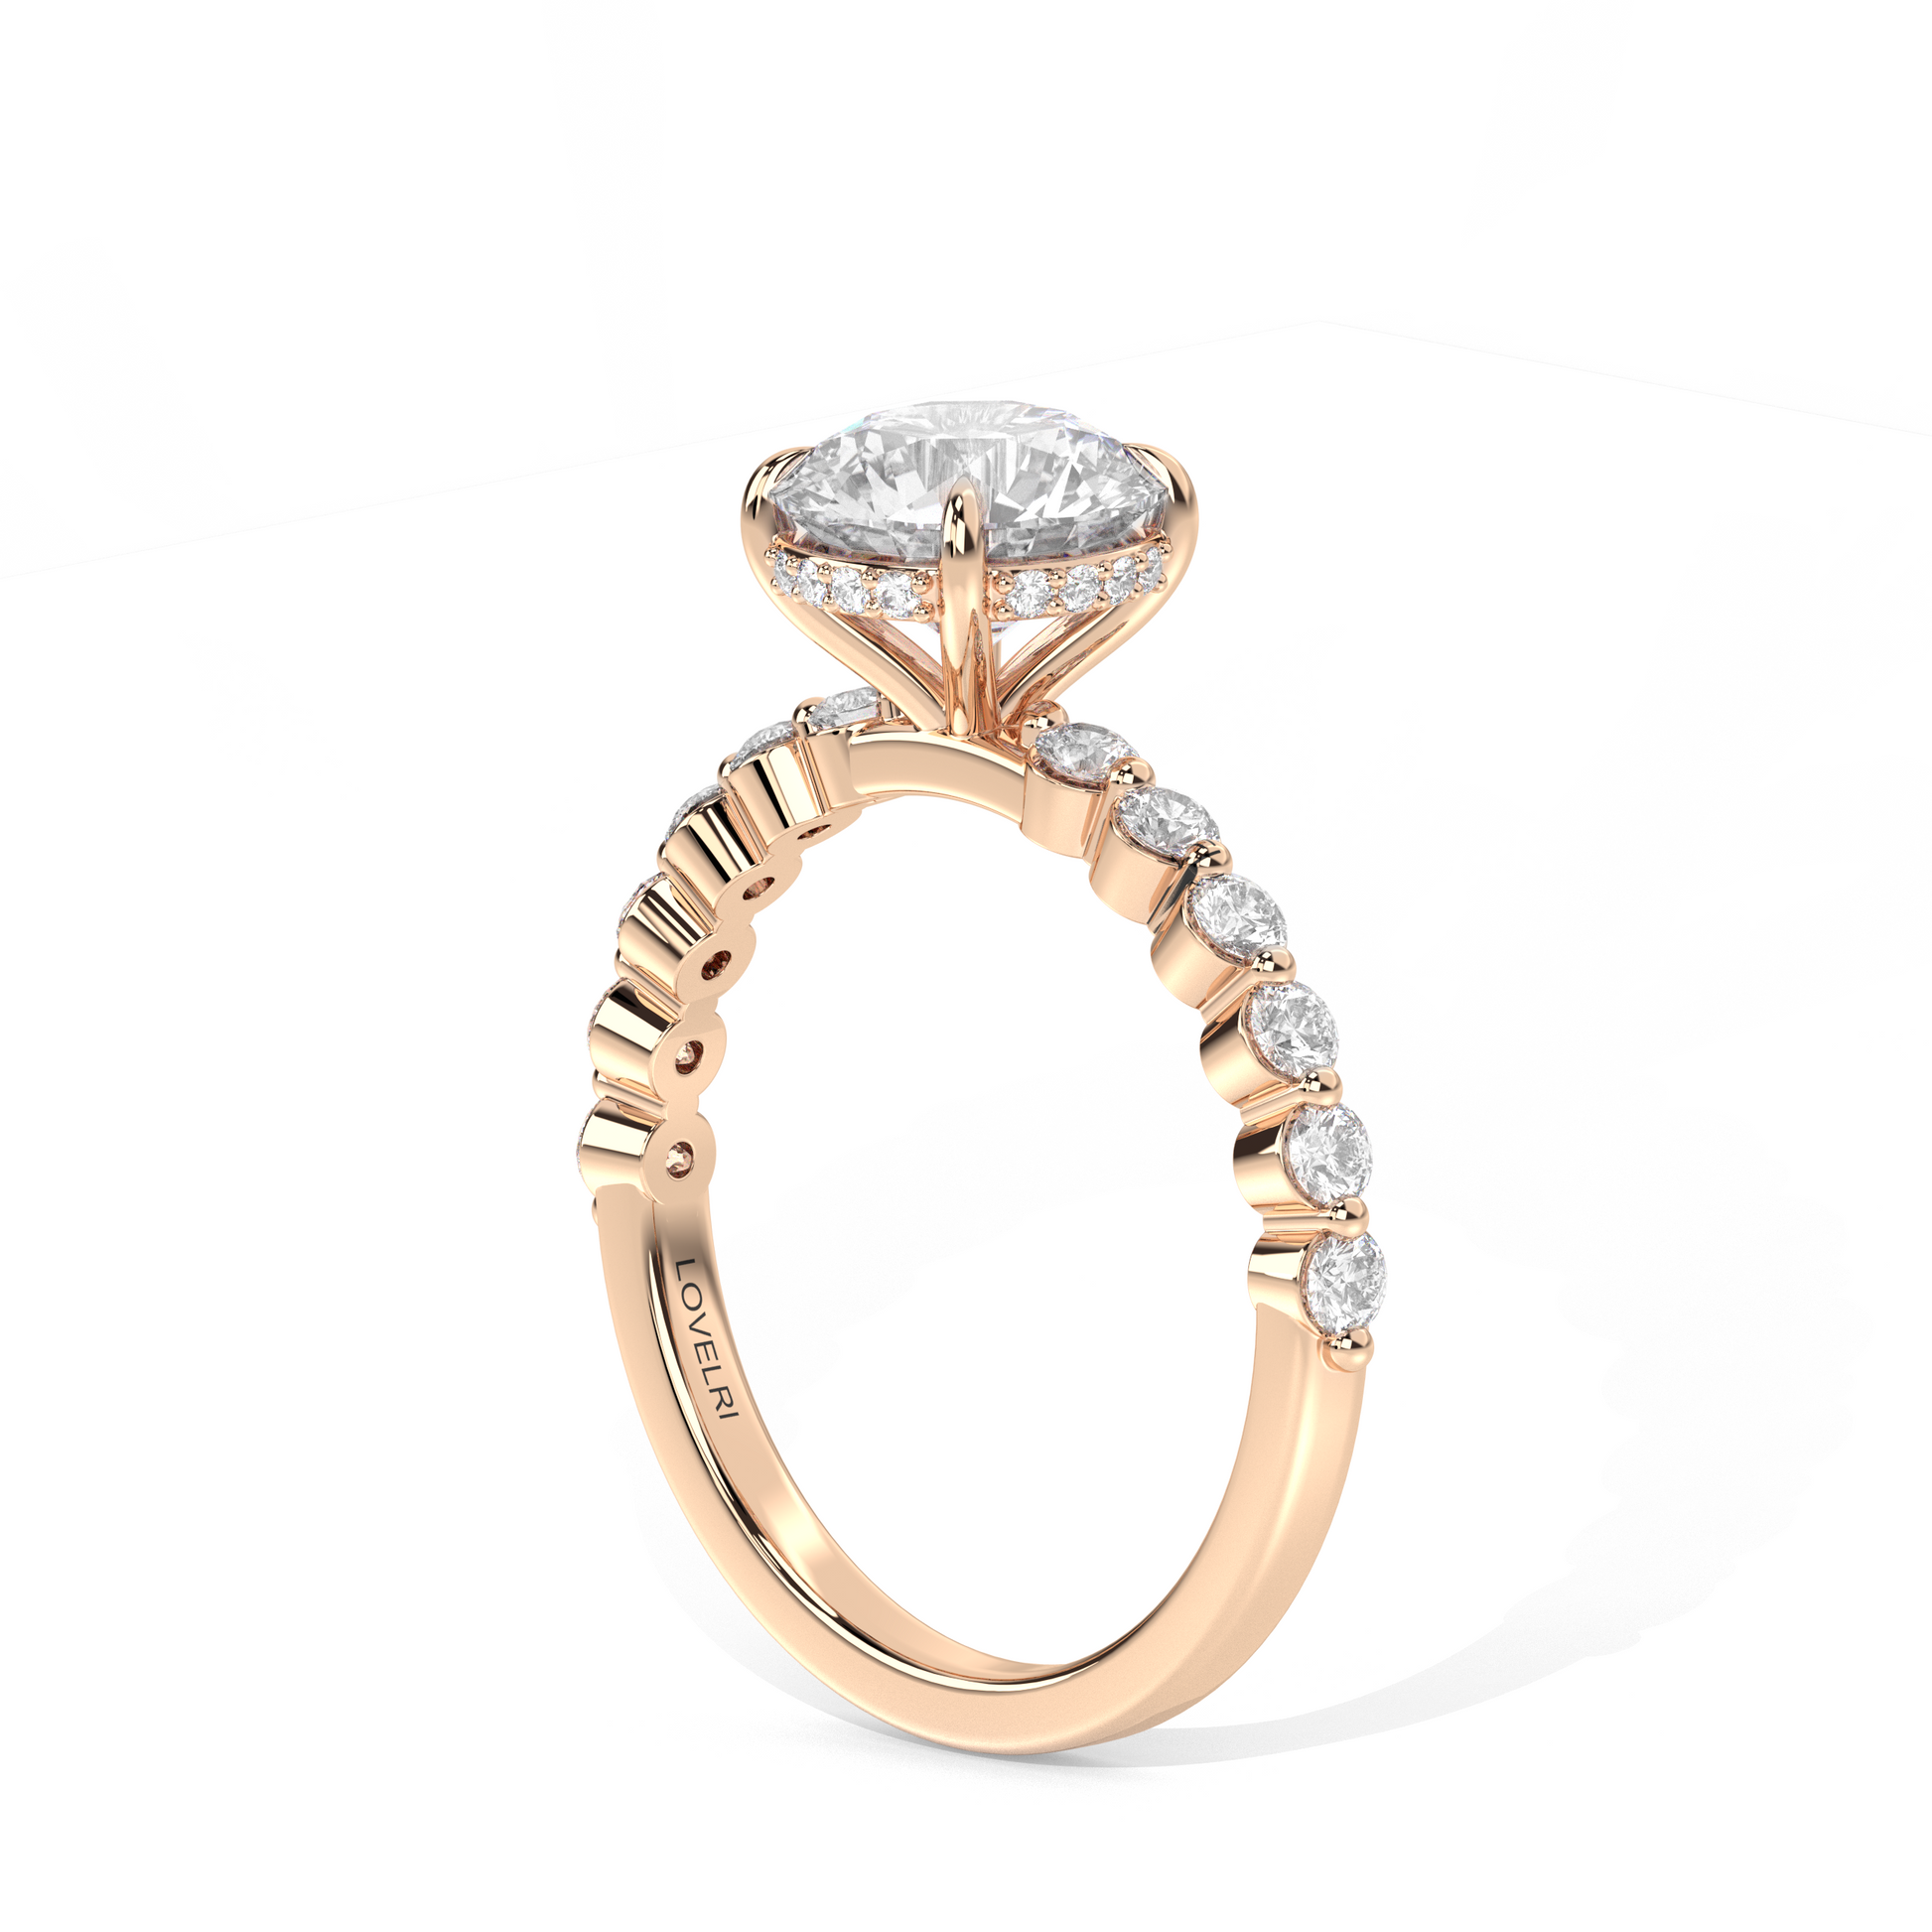 Face Up View - Scalloped Band Round Engagement Ring Rose Gold